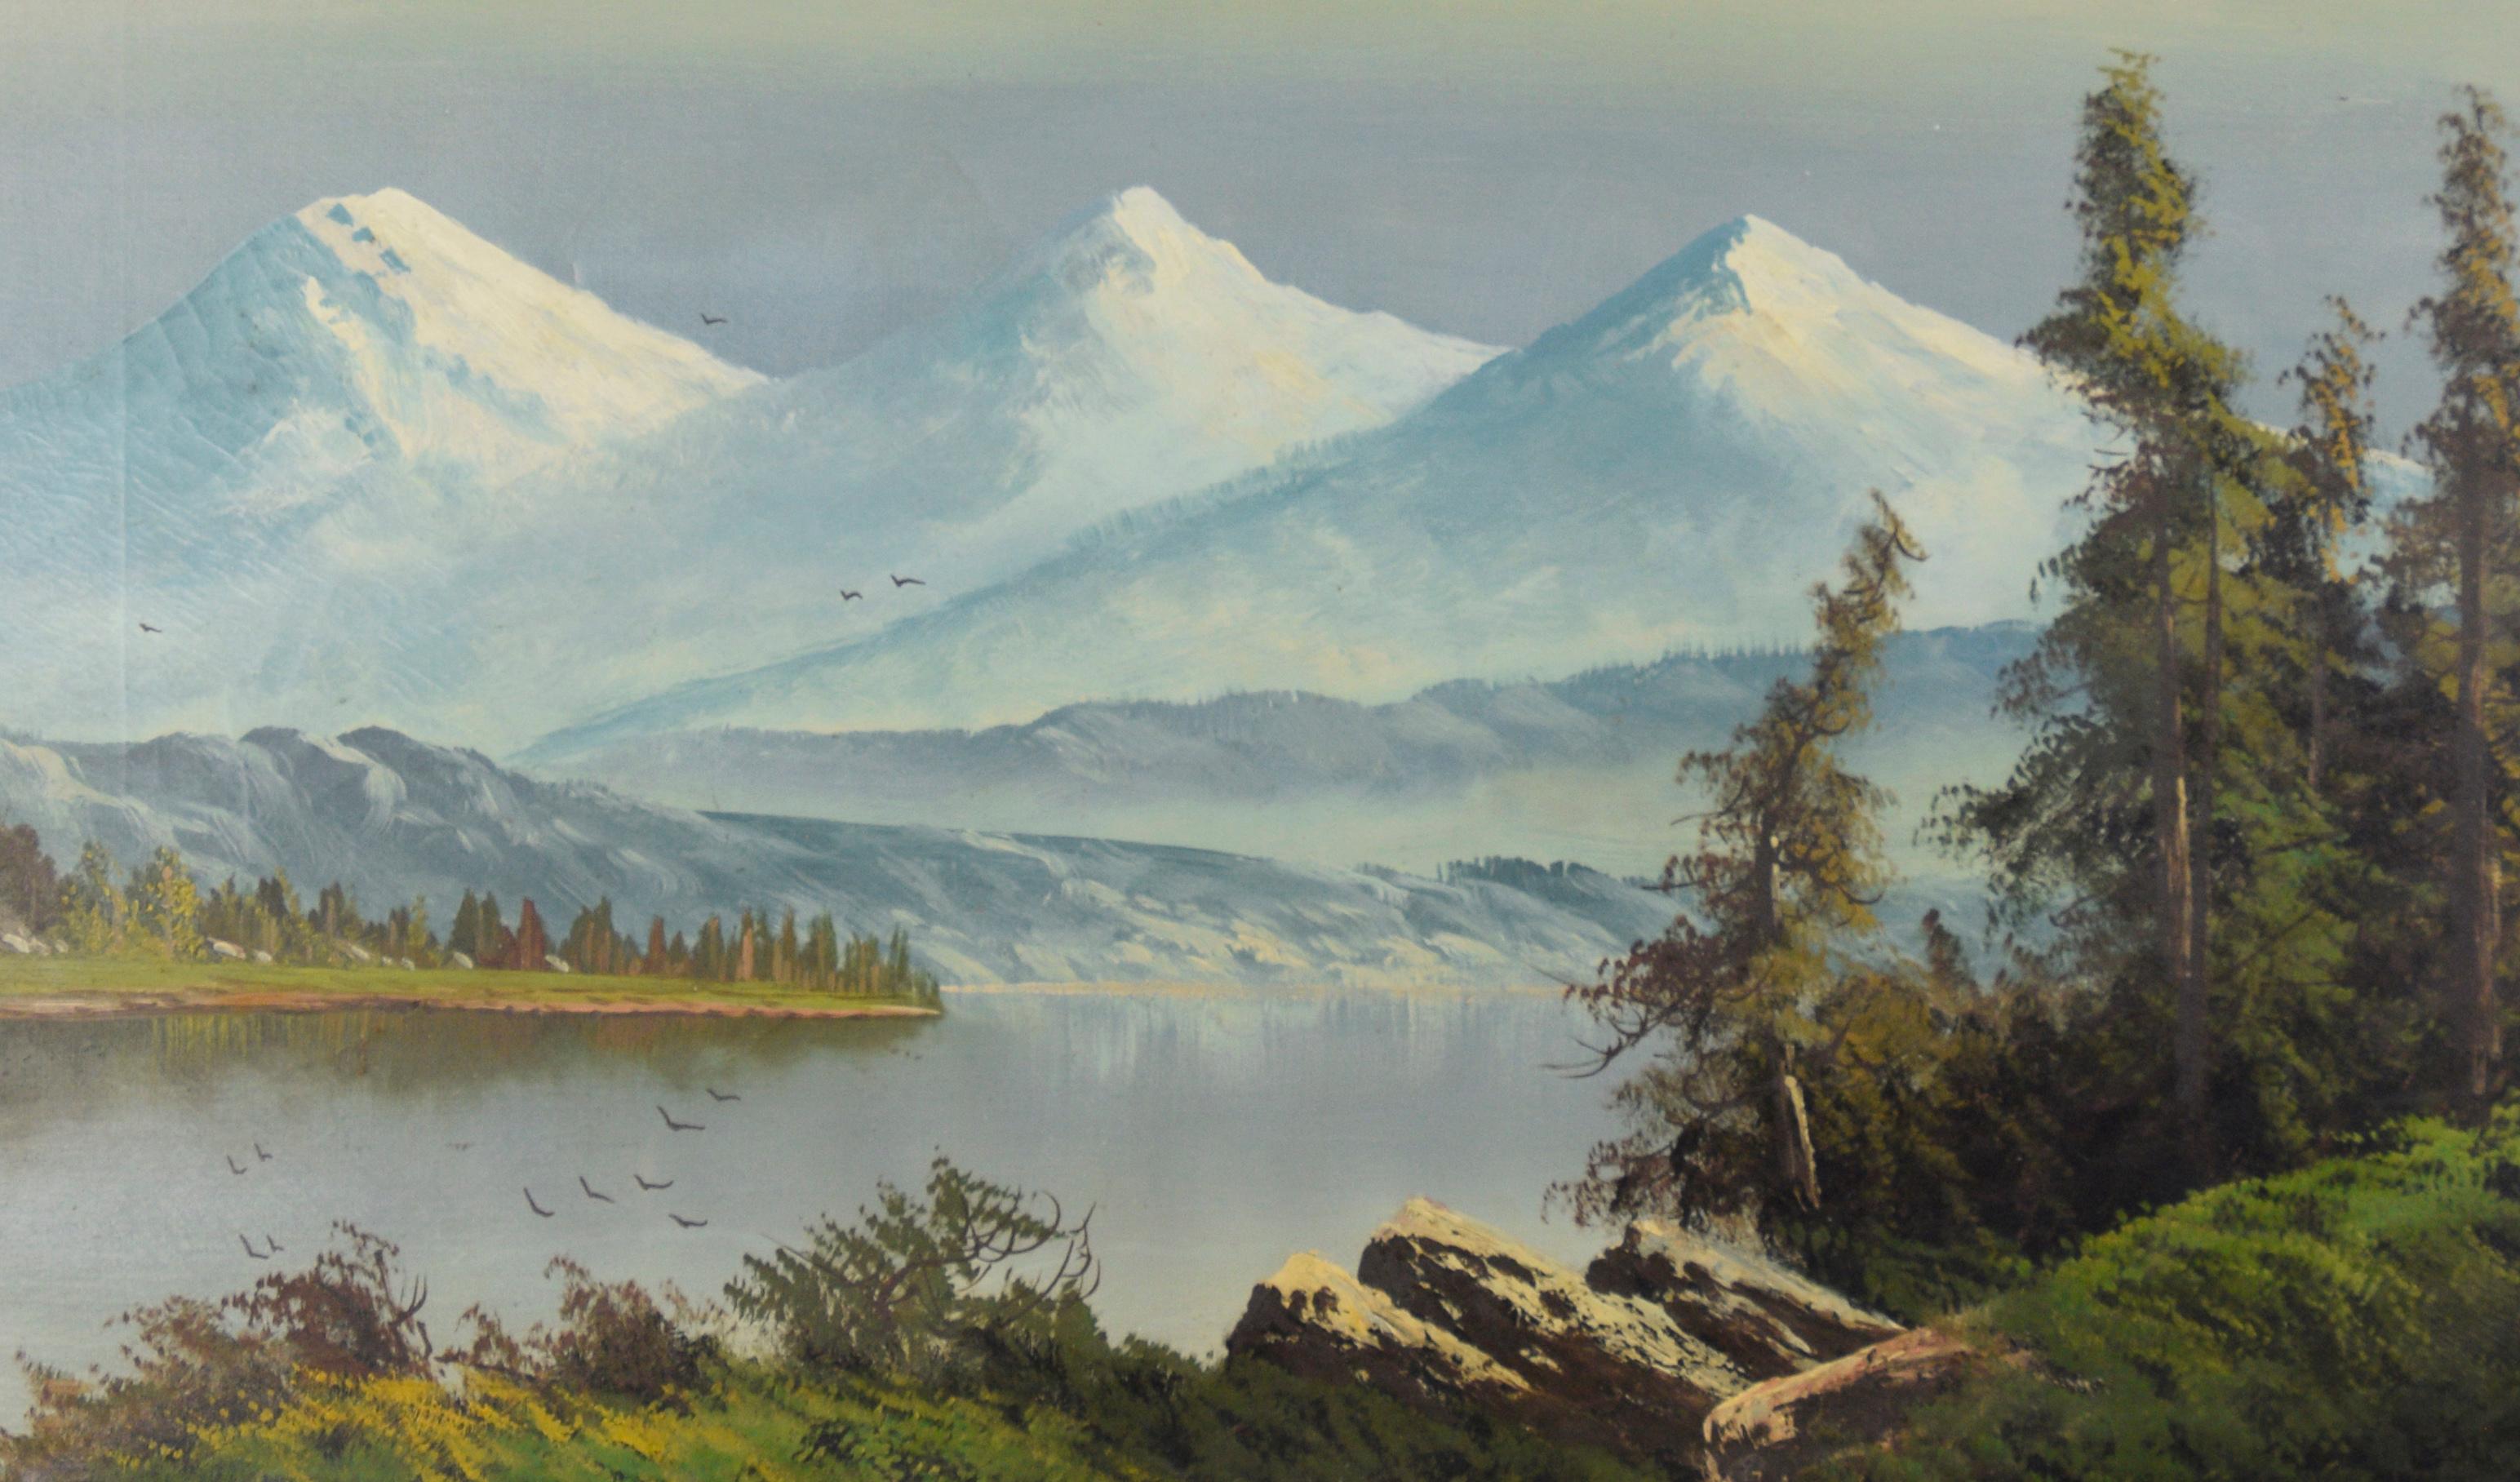 Three Sisters in the Cascade Range, Oregon Lake with Birds Migrating - Impressionist Painting by John Englehart